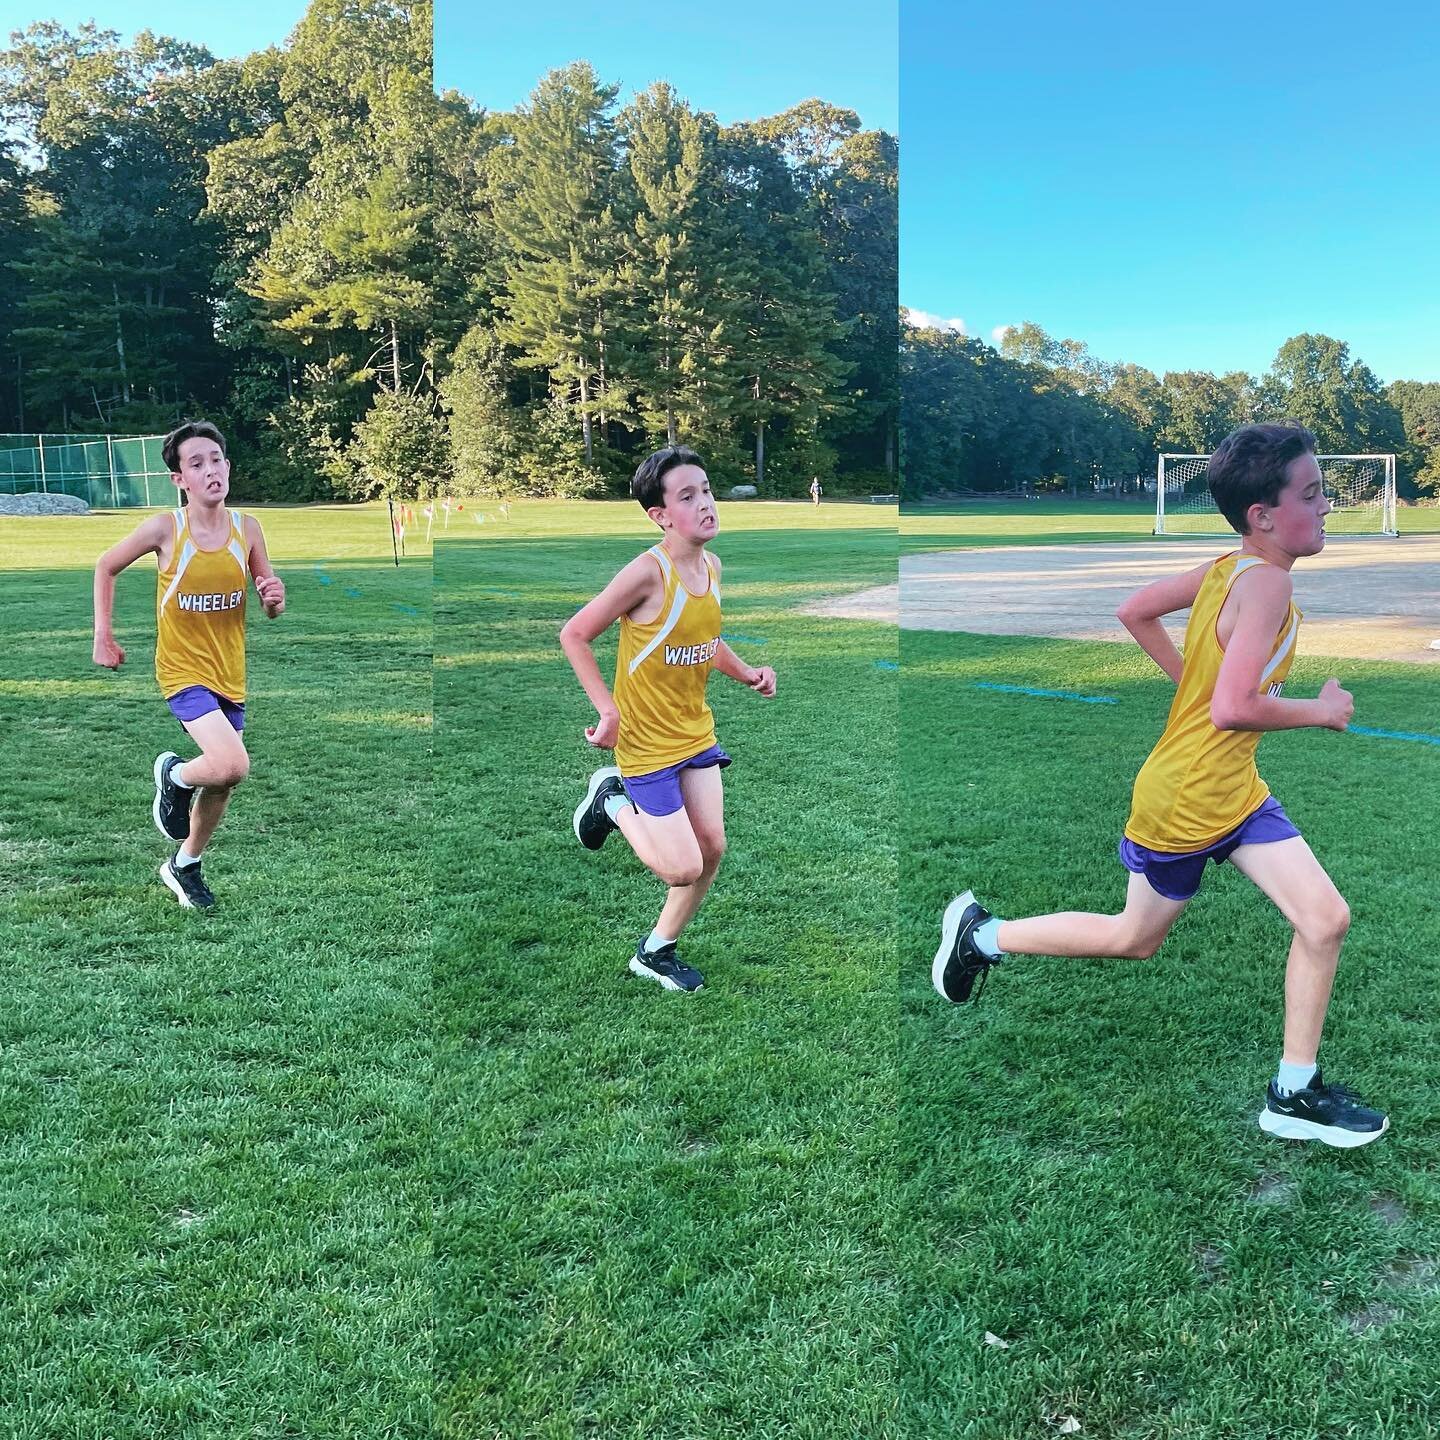 Strong finish today! Proud of this boy for working hard. 💜💛#xcountry #wheelerwarriors